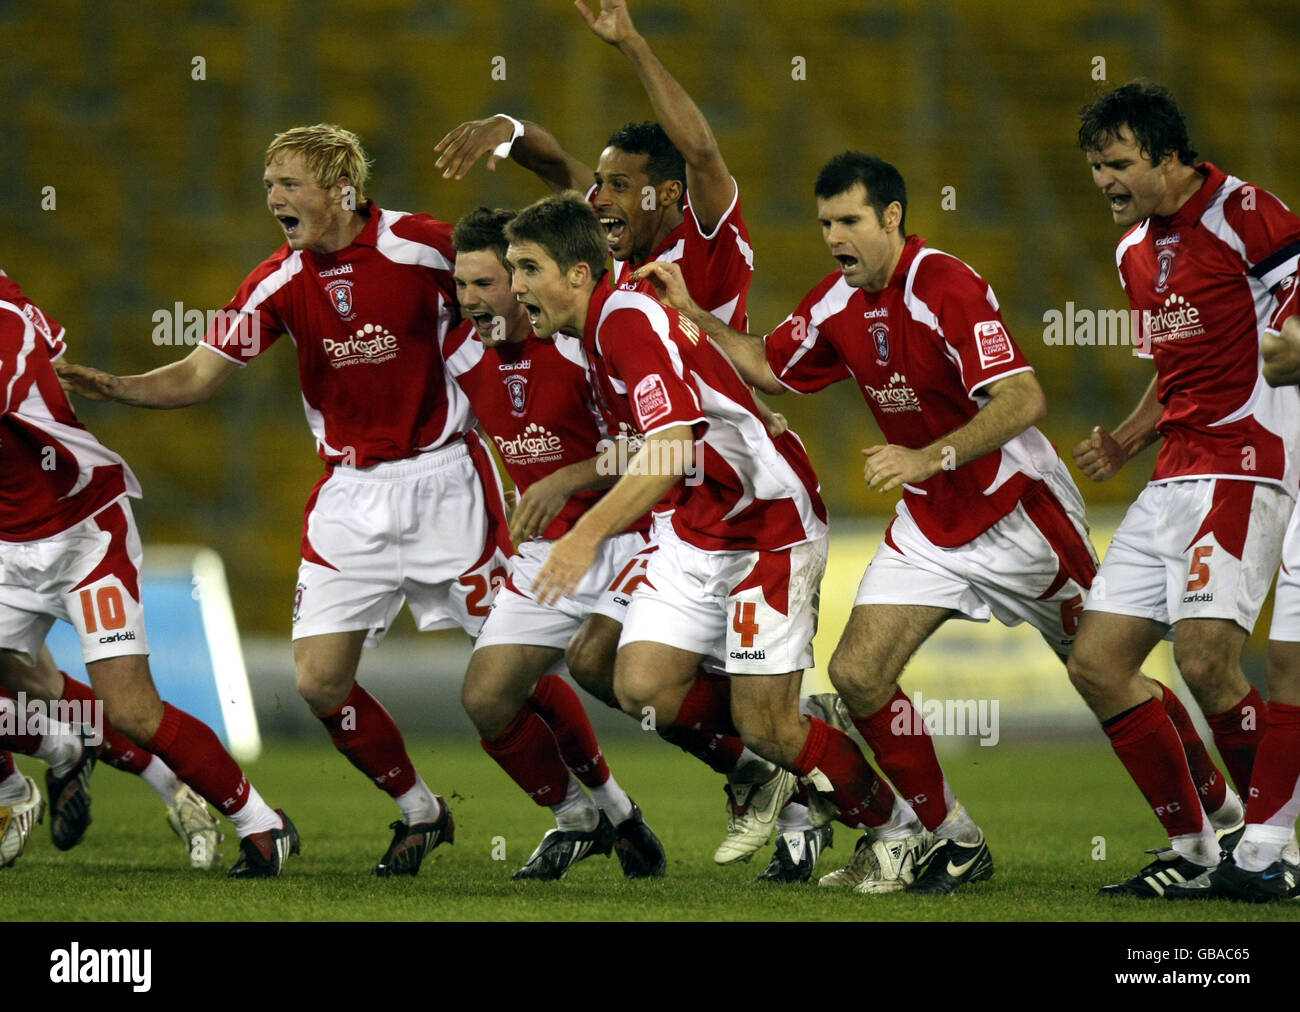 Soccer - Johnstone's Paint Trophy - Northern Section - Rotherham United v Darlington - Don Valley Stadium. Rotherham United's players lead by Danny Harrison (no 4) celebrate their victory in the penalty shoot out Stock Photo